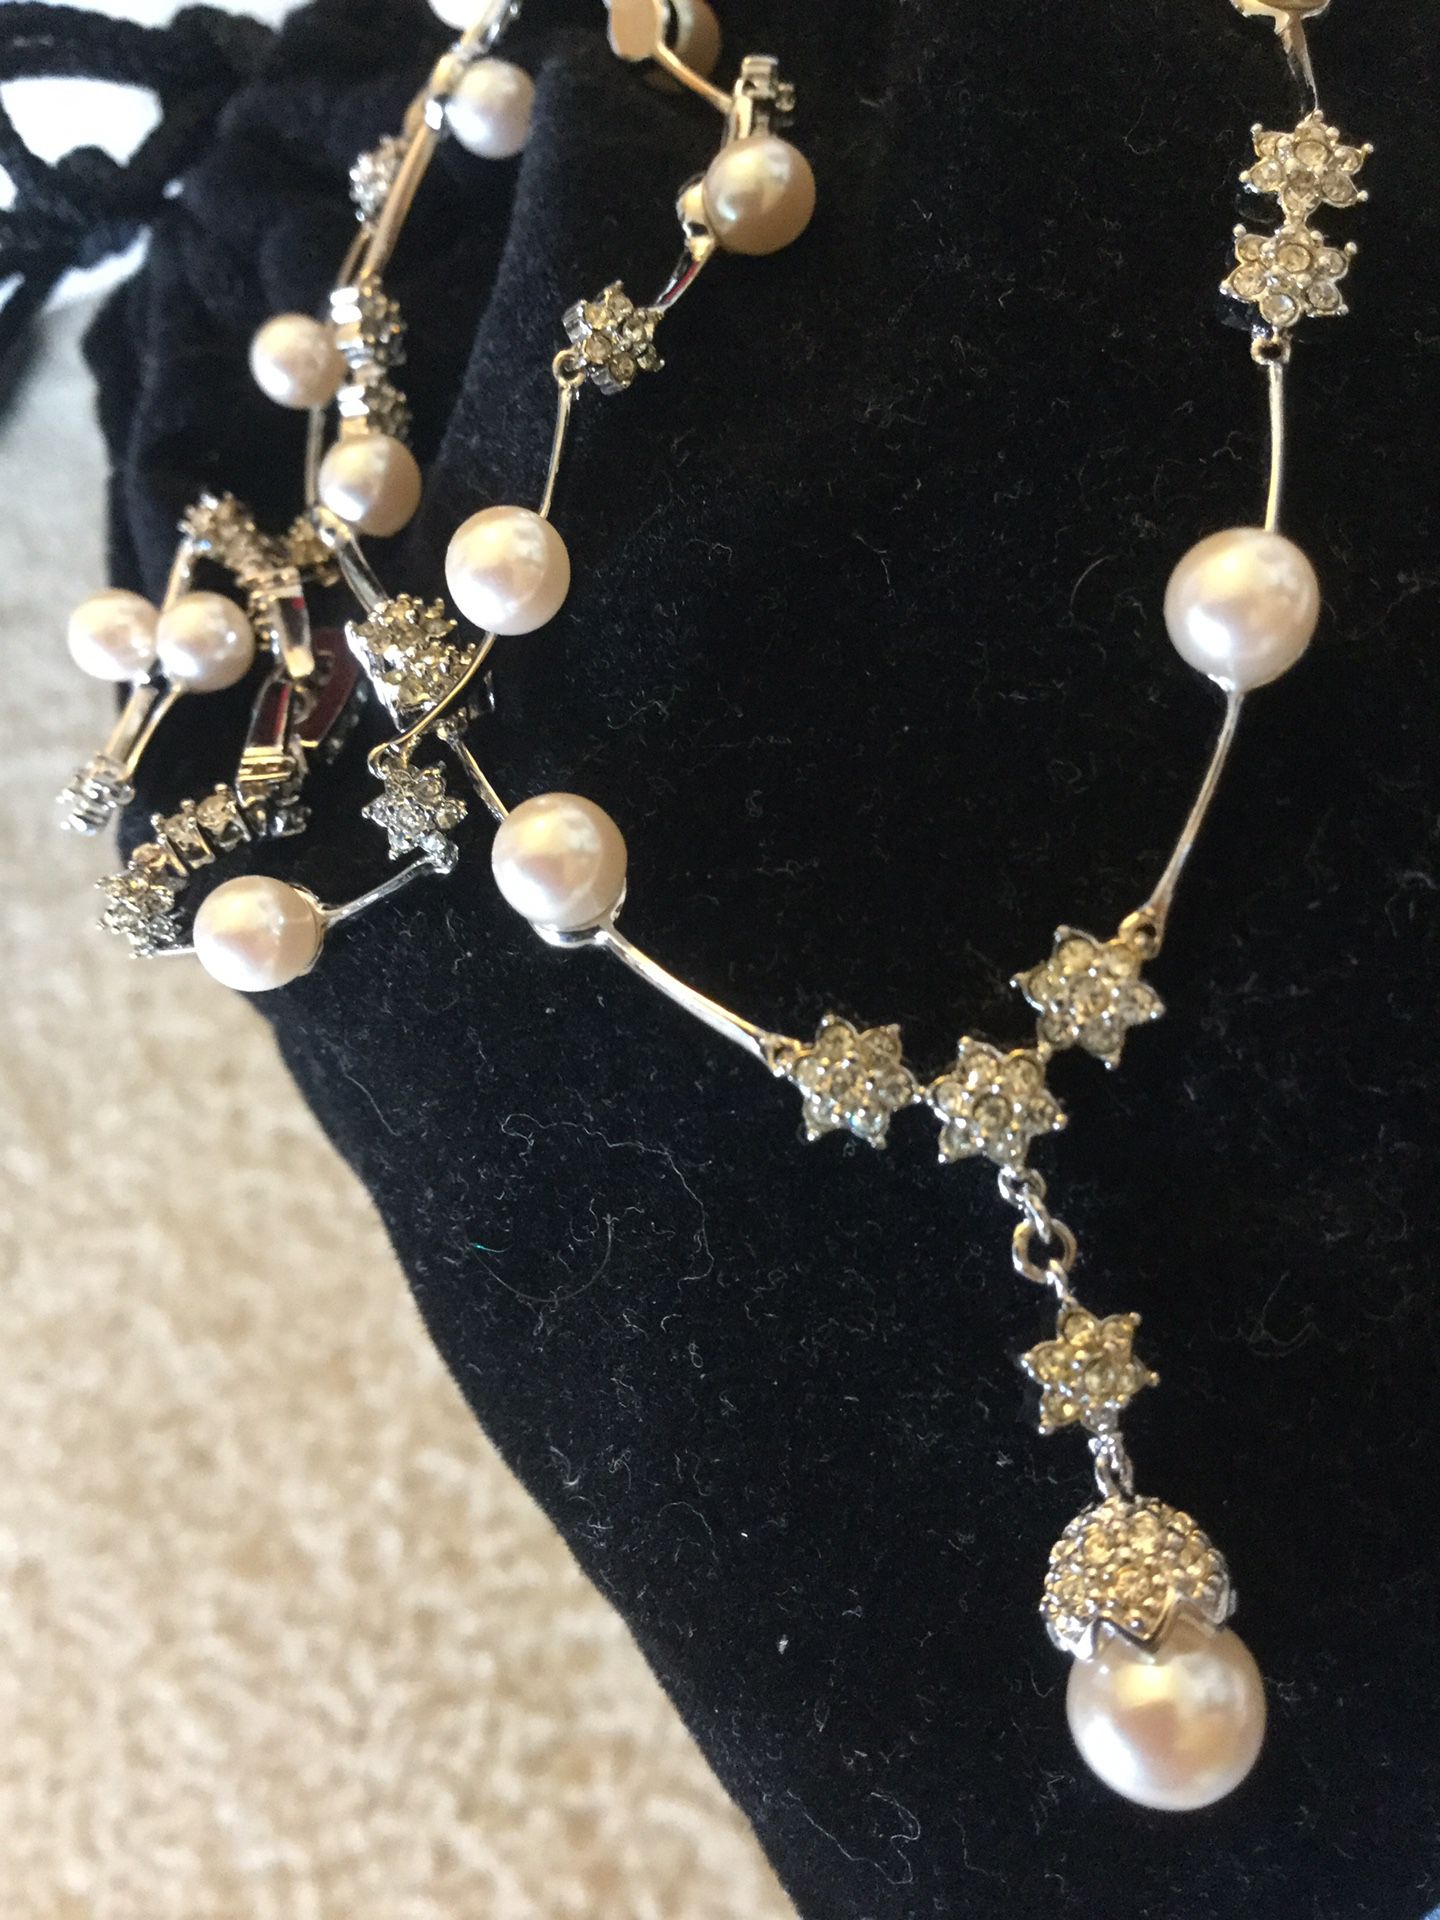 Classy necklace with crystals and faux Pearls💙🧡💙 Macy’s Jewelry very nice / Visit for more